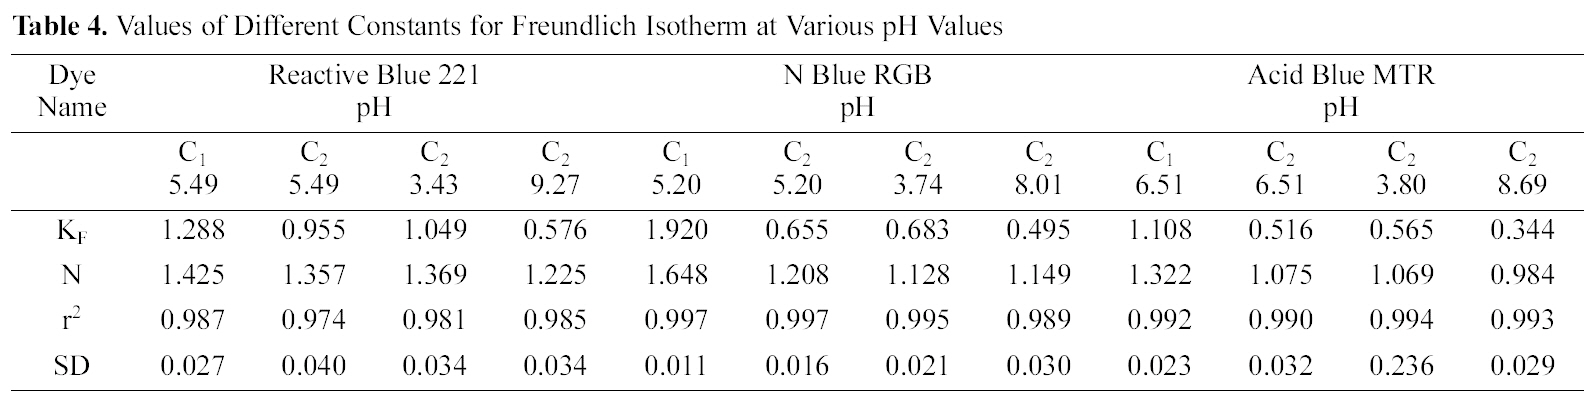 Values of Different Constants for Freundlich Isotherm at Various pH Values